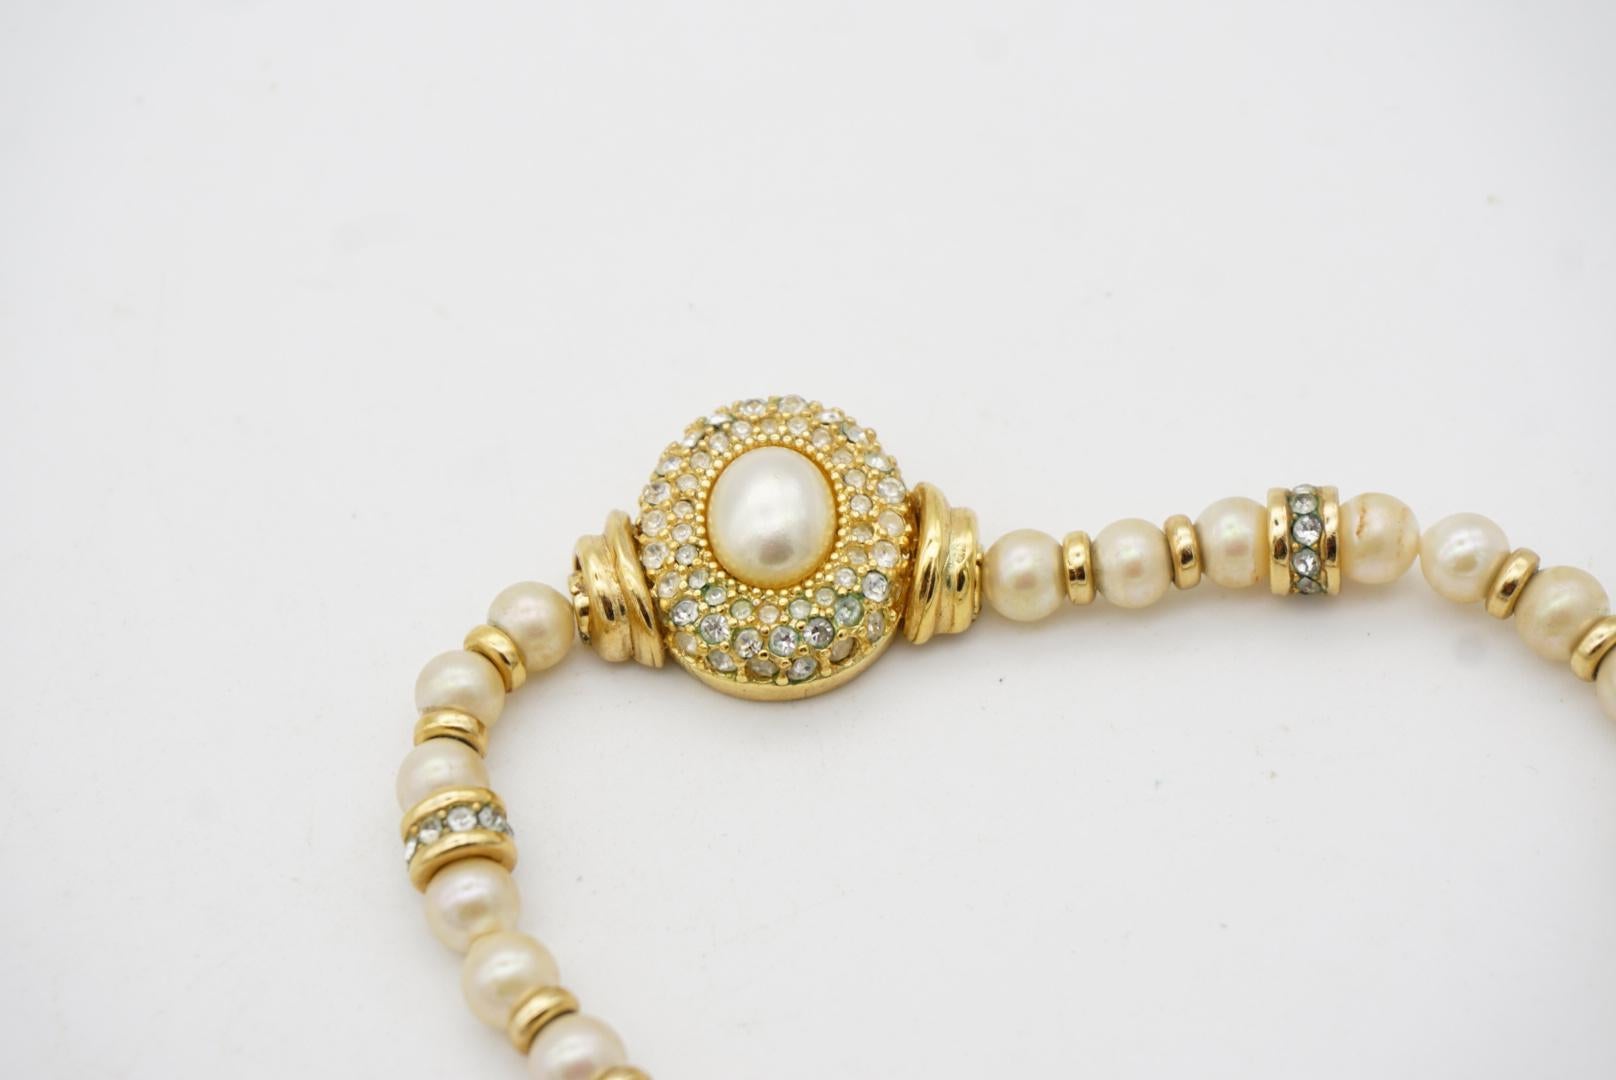 Christian Dior Vintage 1980s White Round Oval Pearl Crystals Pendant Necklace For Sale 8